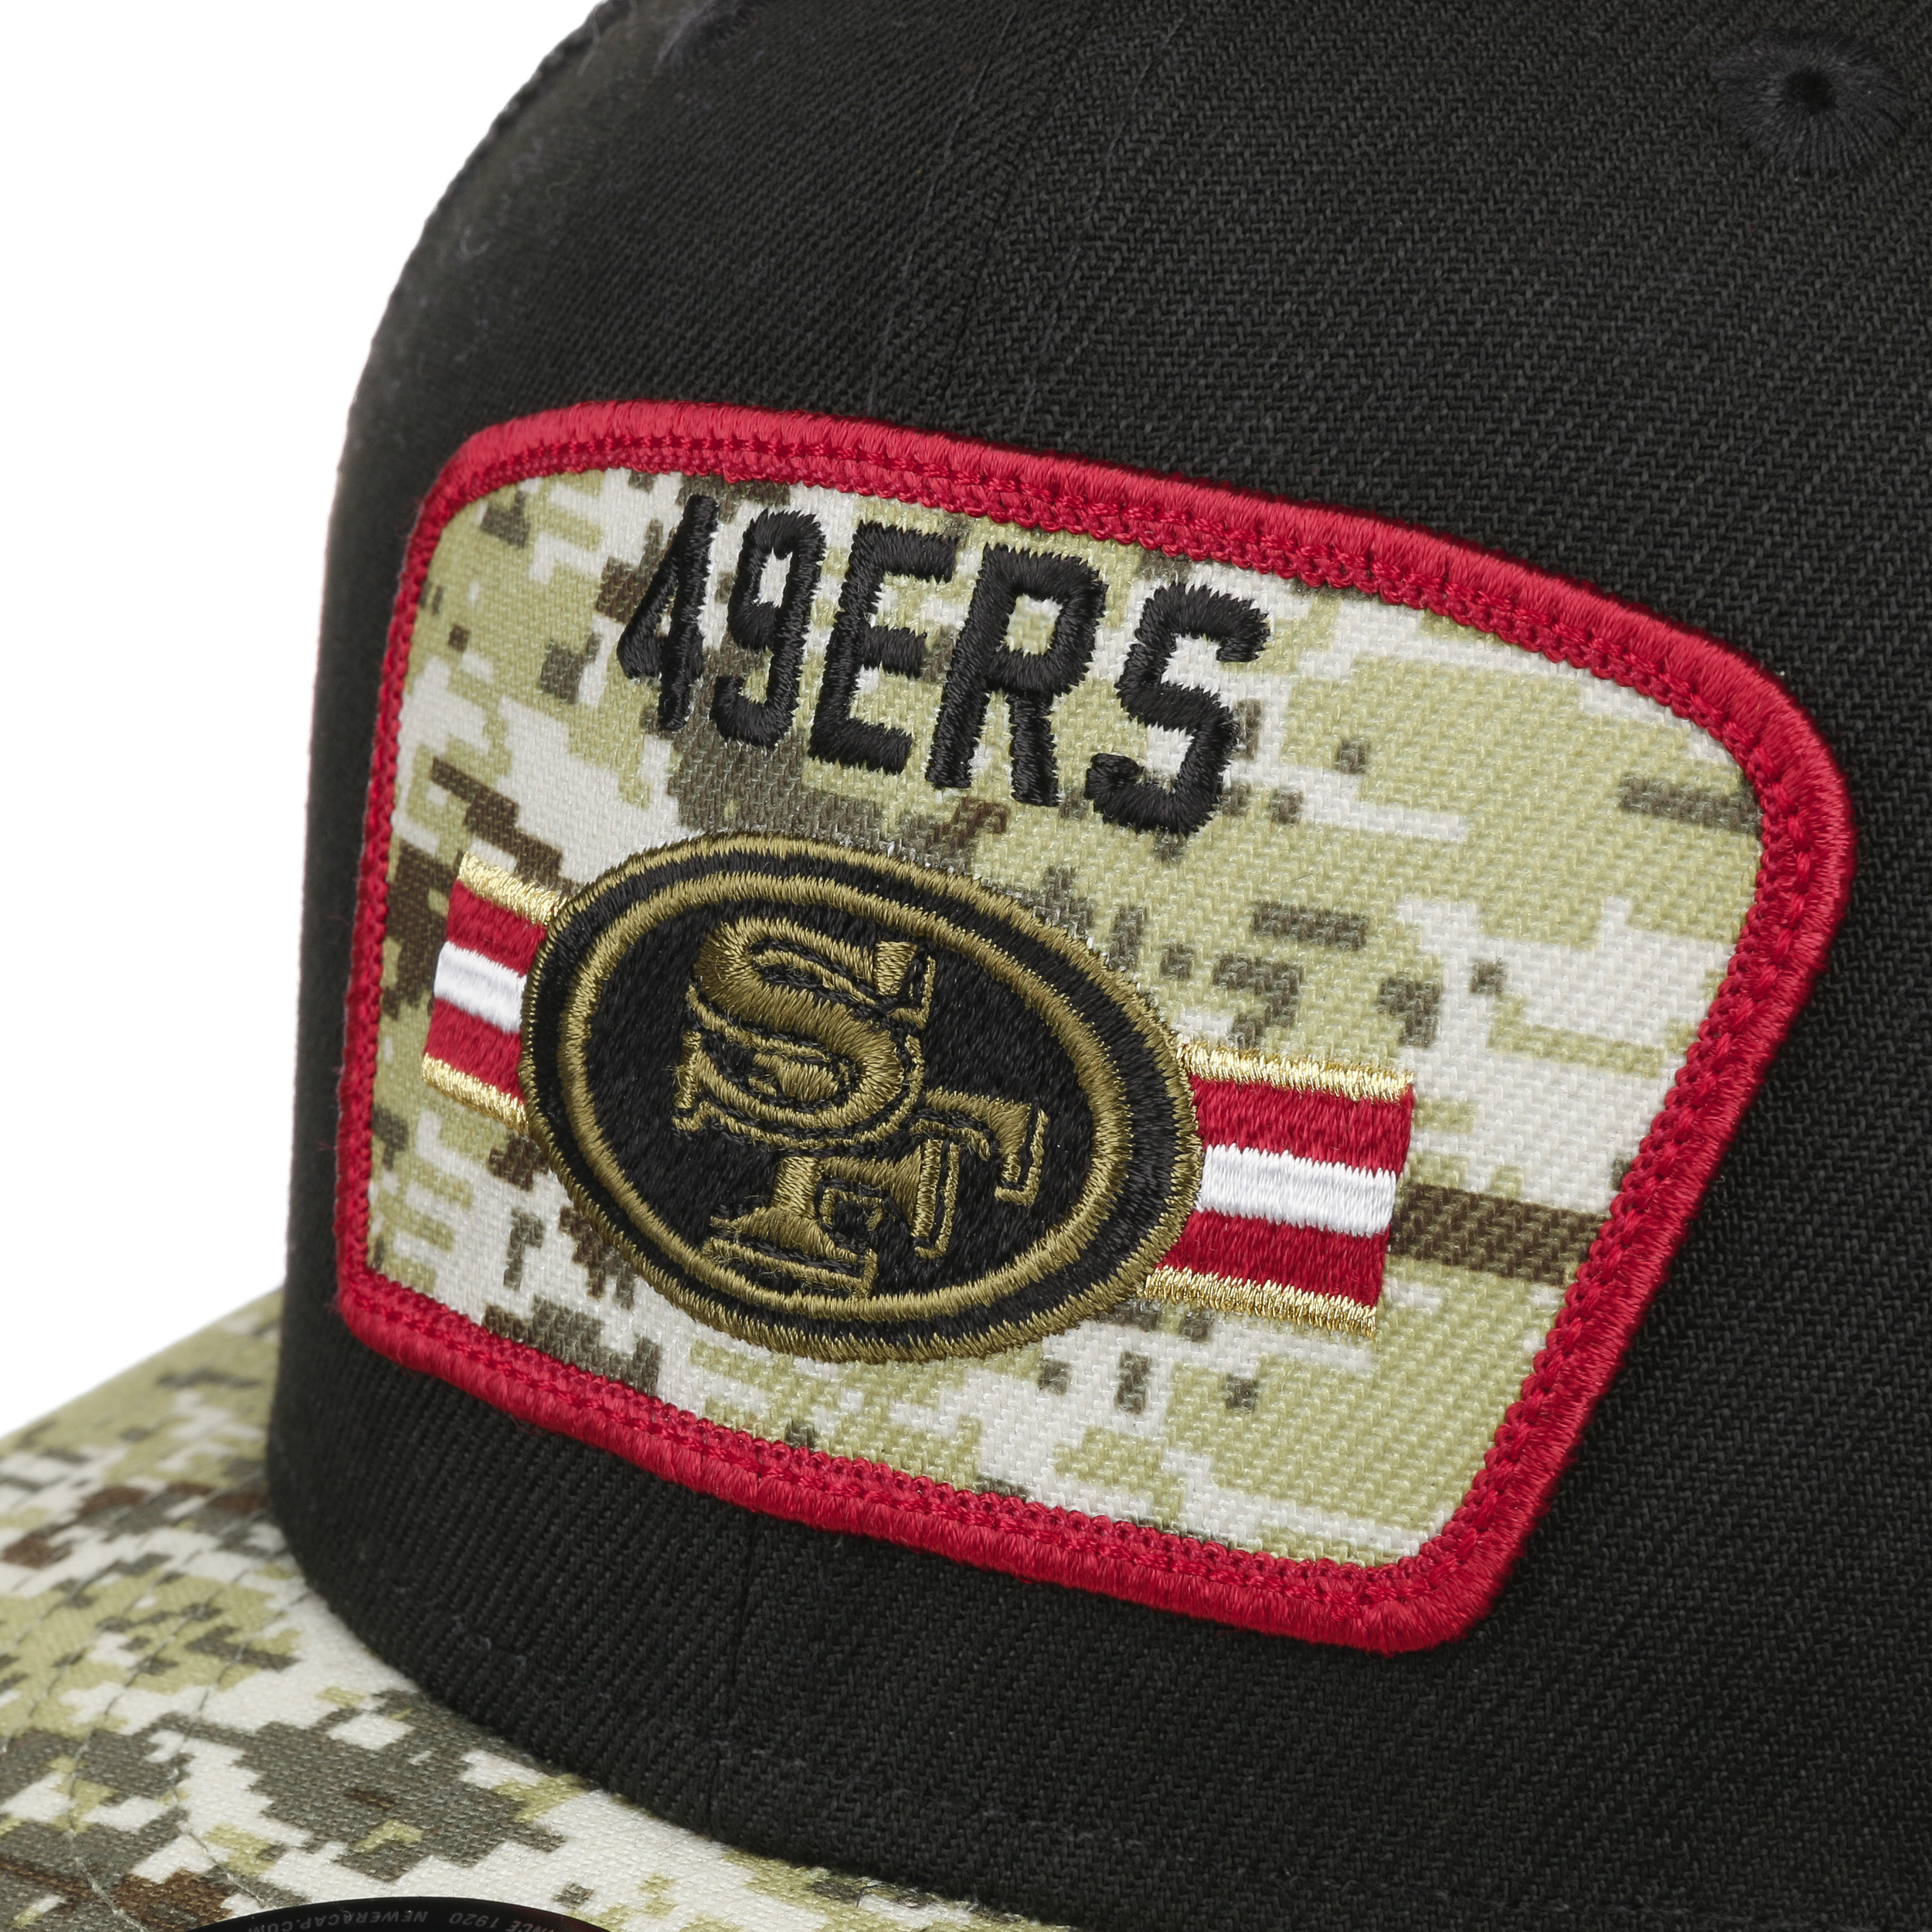 salute to service 49ers